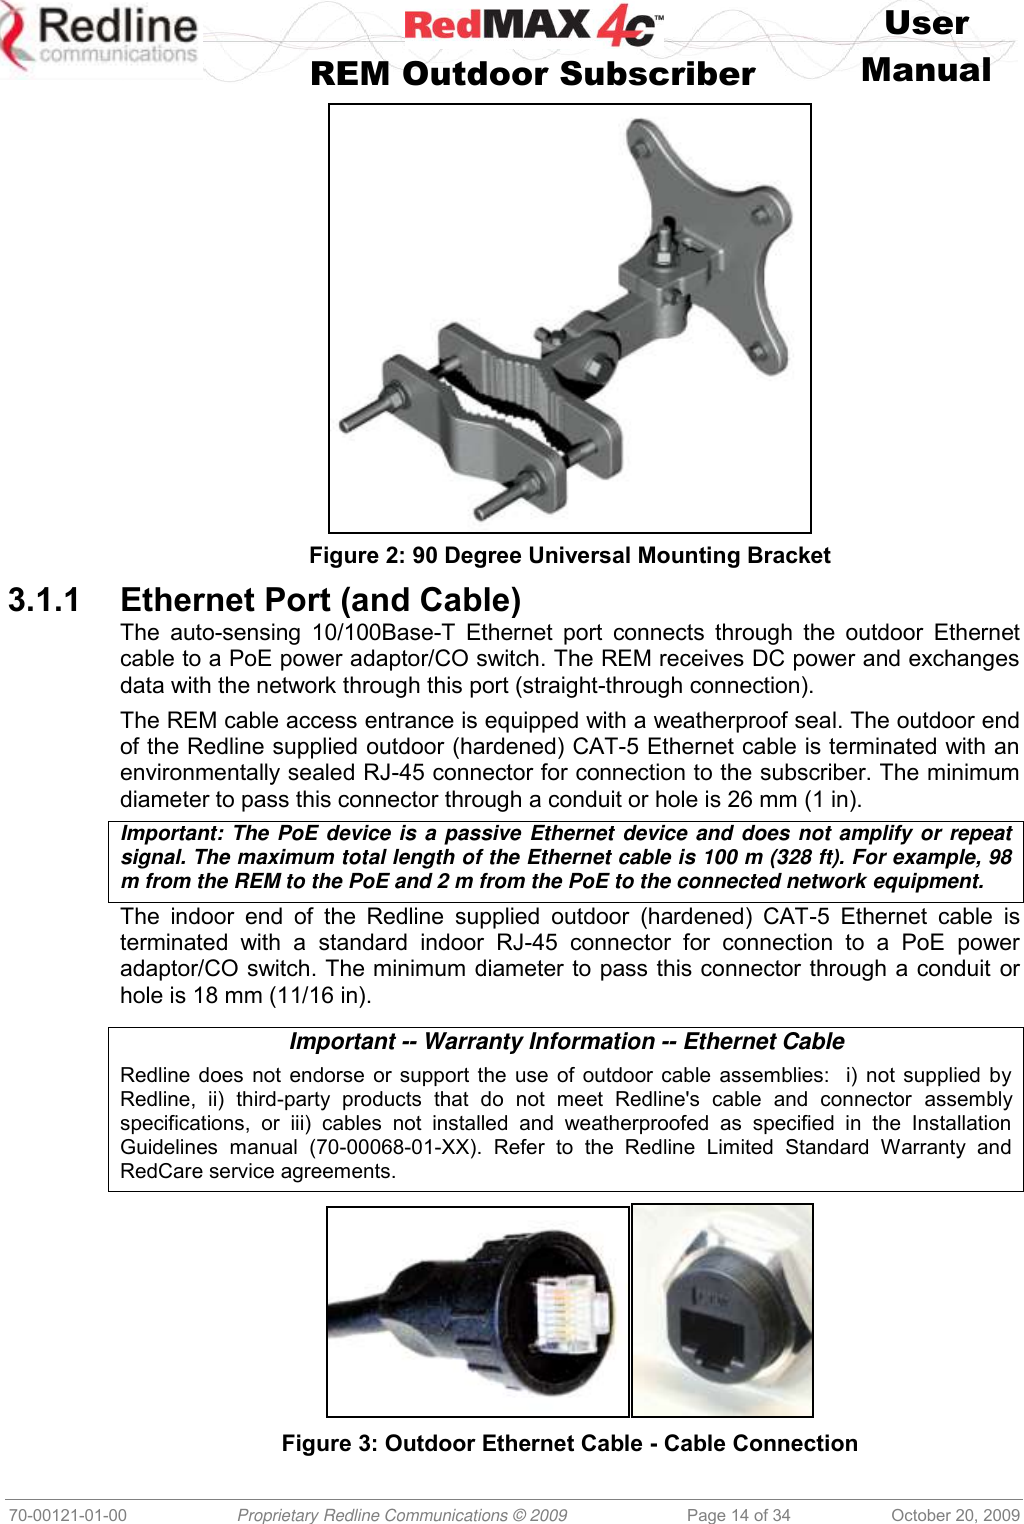    User   REM Outdoor Subscriber  Manual   70-00121-01-00 Proprietary Redline Communications © 2009 Page 14 of 34 October 20, 2009  Figure 2: 90 Degree Universal Mounting Bracket 3.1.1 Ethernet Port (and Cable) The  auto-sensing 10/100Base-T  Ethernet  port  connects through the outdoor Ethernet cable to a PoE power adaptor/CO switch. The REM receives DC power and exchanges data with the network through this port (straight-through connection). The REM cable access entrance is equipped with a weatherproof seal. The outdoor end of the Redline supplied outdoor (hardened) CAT-5 Ethernet cable is terminated with an environmentally sealed RJ-45 connector for connection to the subscriber. The minimum diameter to pass this connector through a conduit or hole is 26 mm (1 in). Important: The PoE device is a passive Ethernet device and does not amplify or repeat signal. The maximum total length of the Ethernet cable is 100 m (328 ft). For example, 98 m from the REM to the PoE and 2 m from the PoE to the connected network equipment. The  indoor  end  of  the  Redline  supplied  outdoor  (hardened)  CAT-5  Ethernet  cable  is terminated  with  a  standard  indoor  RJ-45  connector  for  connection  to  a  PoE  power adaptor/CO switch. The minimum diameter to pass this connector through a conduit or hole is 18 mm (11/16 in).  Important -- Warranty Information -- Ethernet Cable Redline does not endorse or support the use of outdoor cable assemblies:  i) not supplied by Redline,  ii)  third-party  products  that  do  not  meet  Redline&apos;s  cable  and  connector  assembly specifications,  or  iii)  cables  not  installed  and  weatherproofed  as  specified  in  the  Installation Guidelines  manual  (70-00068-01-XX).  Refer  to  the  Redline  Limited  Standard  Warranty  and RedCare service agreements.   Figure 3: Outdoor Ethernet Cable - Cable Connection 